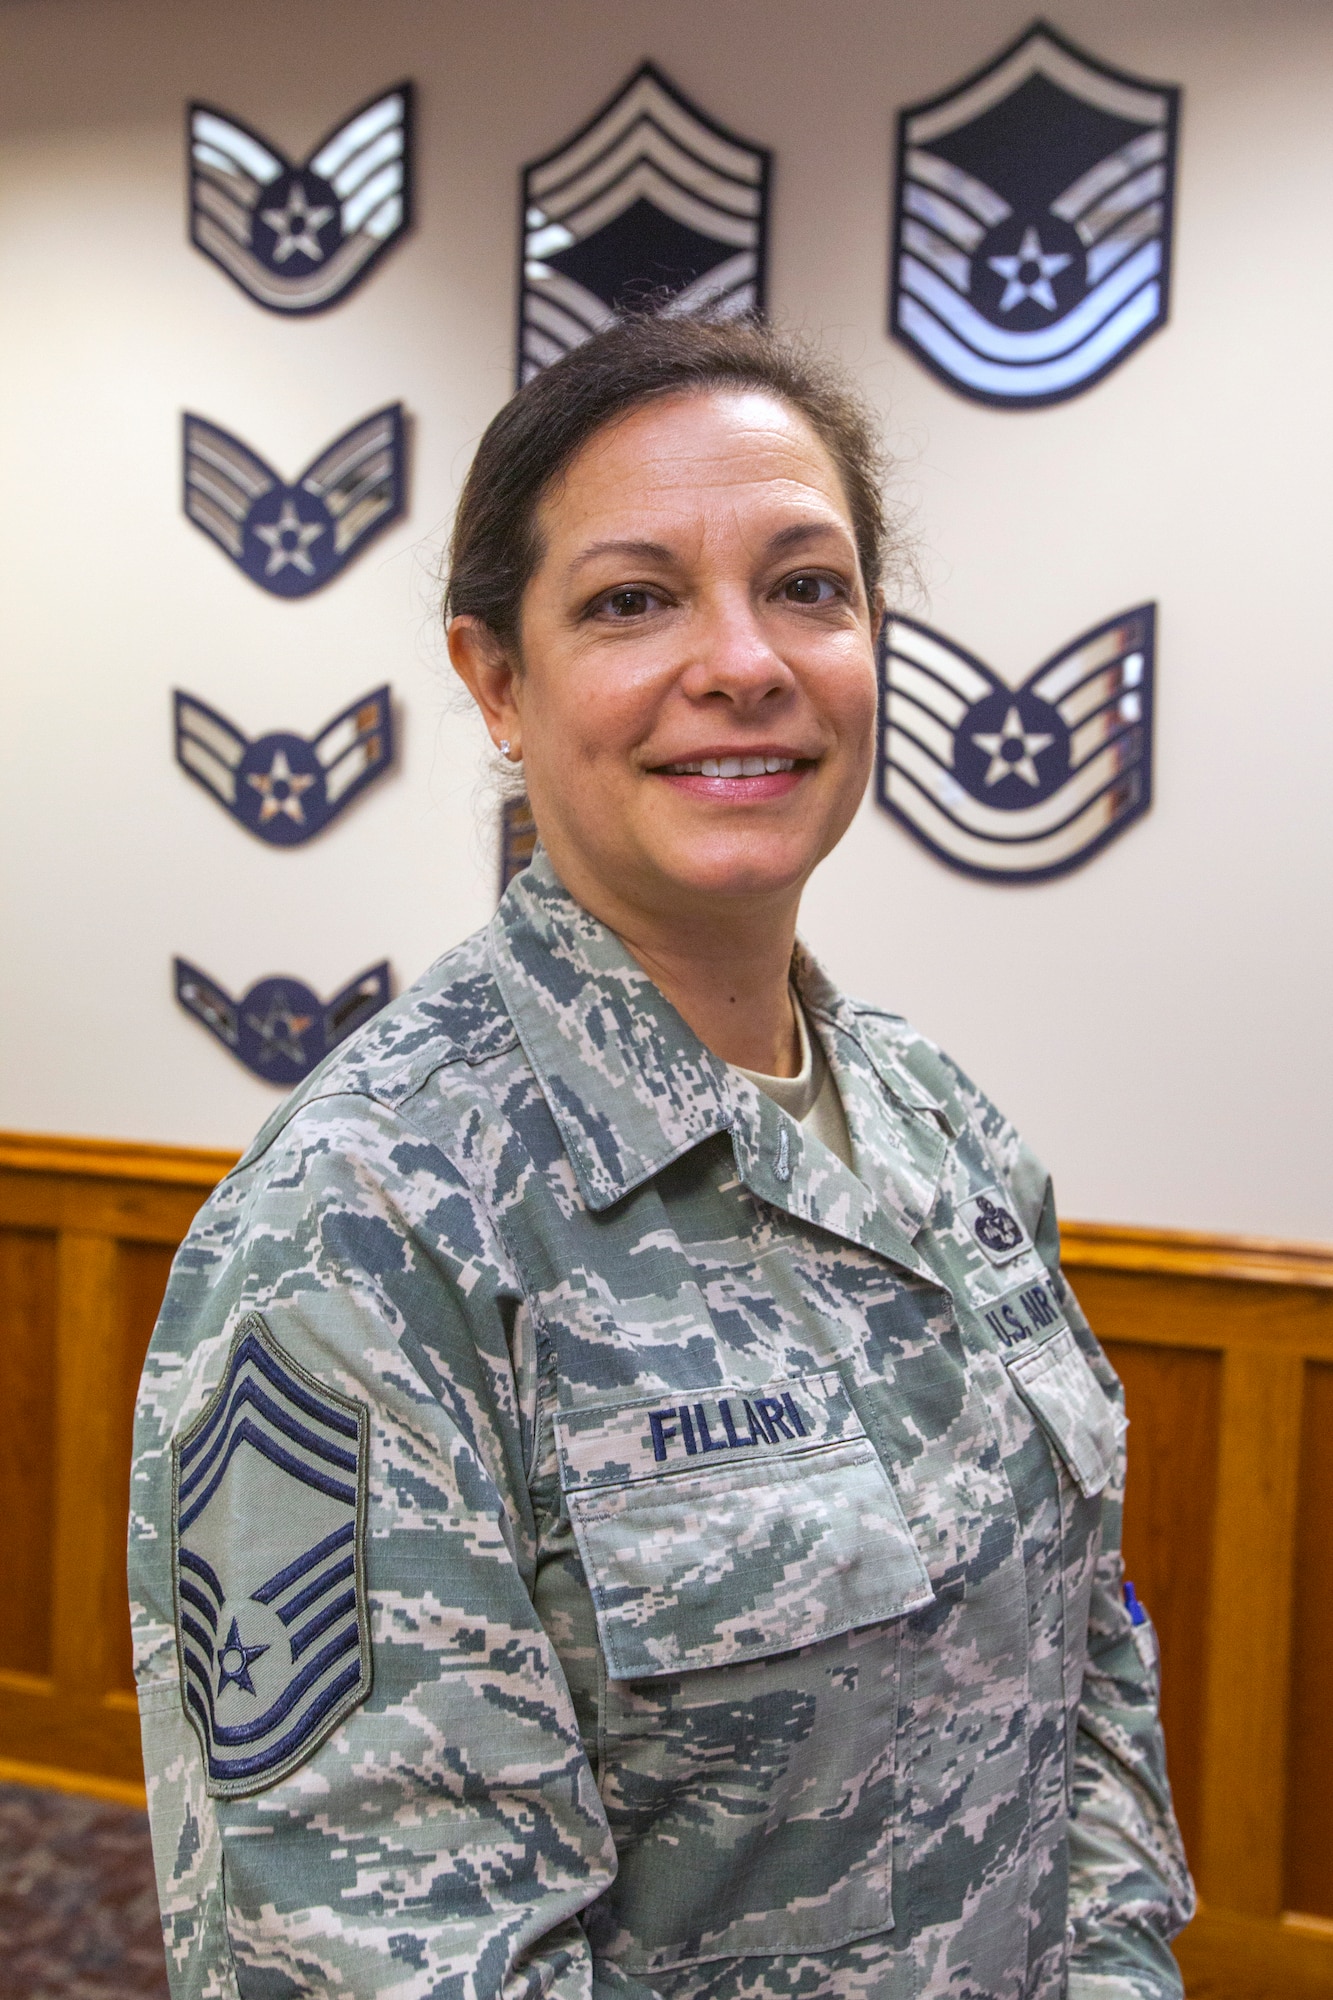 New Jersey State Command Chief Master Master Sgt.  Janeen M. Fillari stands in front of a wall displaying all the enlisted ranks at Joint Force Headquarters, New Jersey Air National Guard, at Joint Base McGuire-Dix-Lakehurst, N.J., March 15, 2016. Fillari is the first woman to serve as the New Jersey State Command Chief Master Sergeant for the New Jersey Air National Guard. (U.S. Air National Guard photo by Master Sgt. Mark C. Olsen/Released)